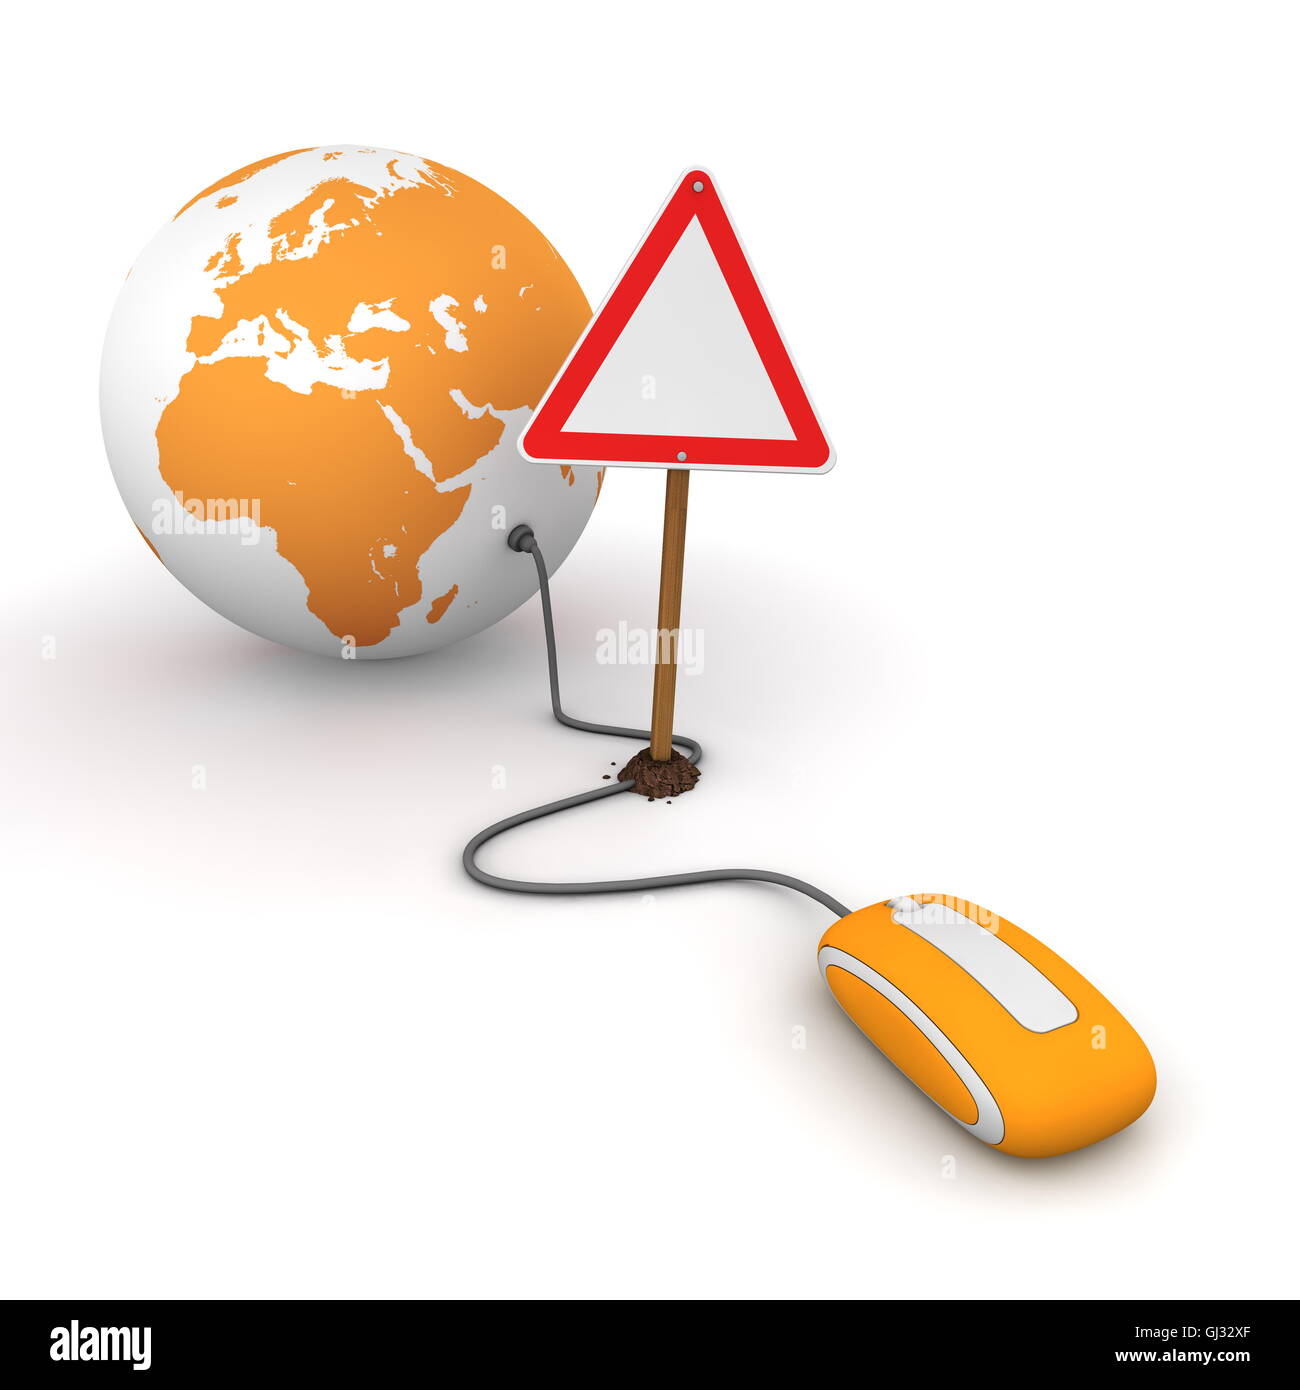 Surfing the Web in Orange - Blocked by a Triangular Warning Sign Stock Photo